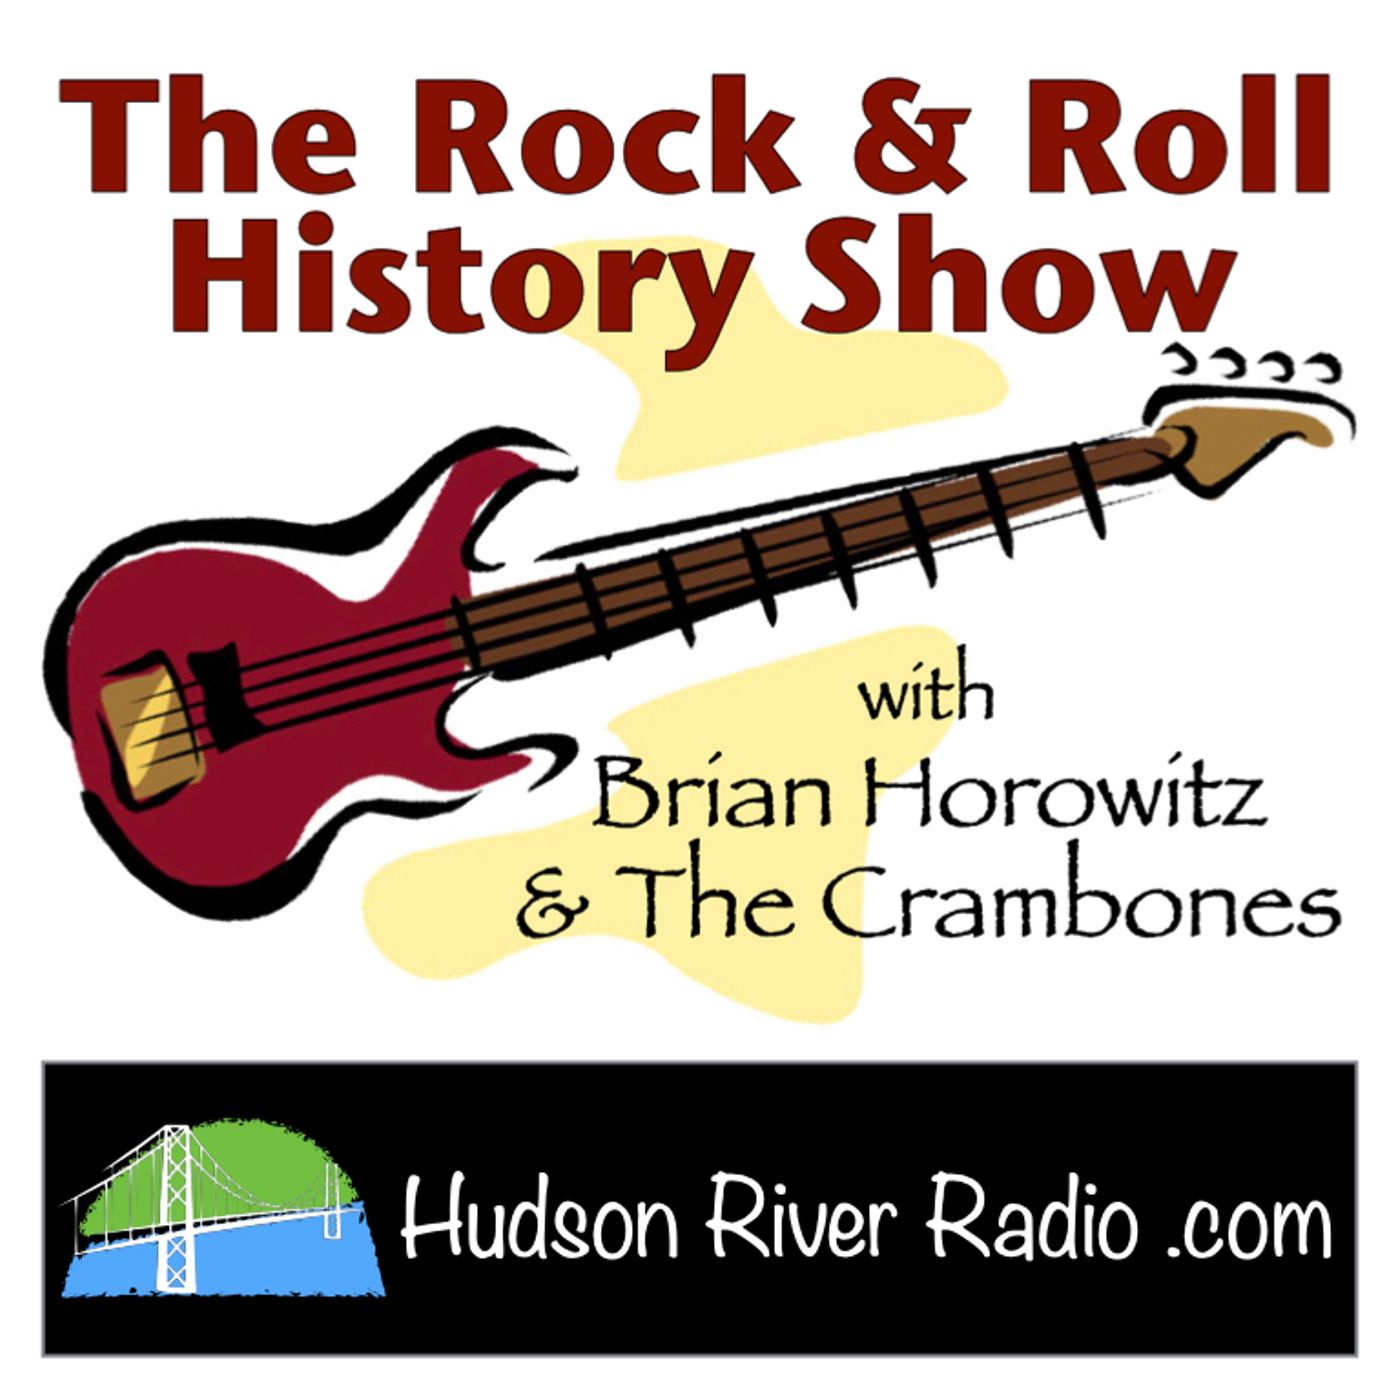 The Rock & Roll History Show